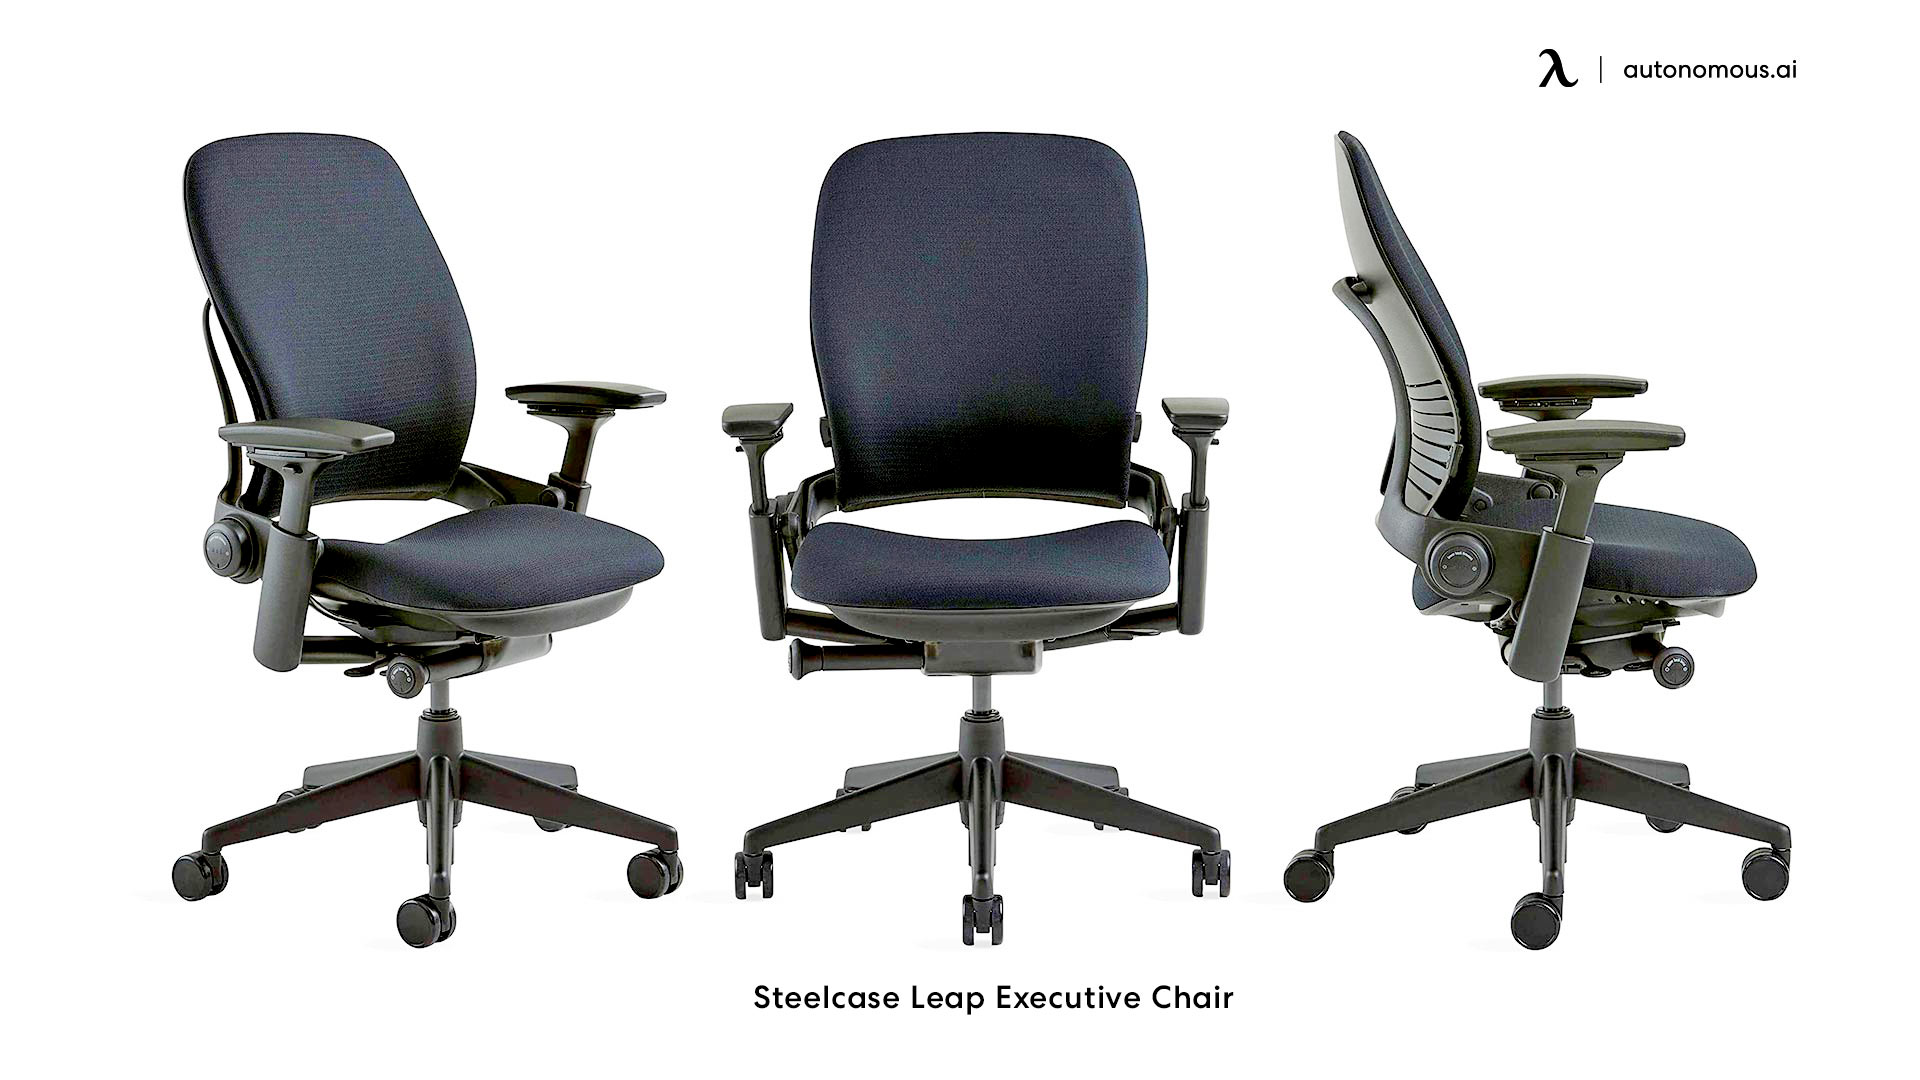 Steelcase Leap adjustable office chair